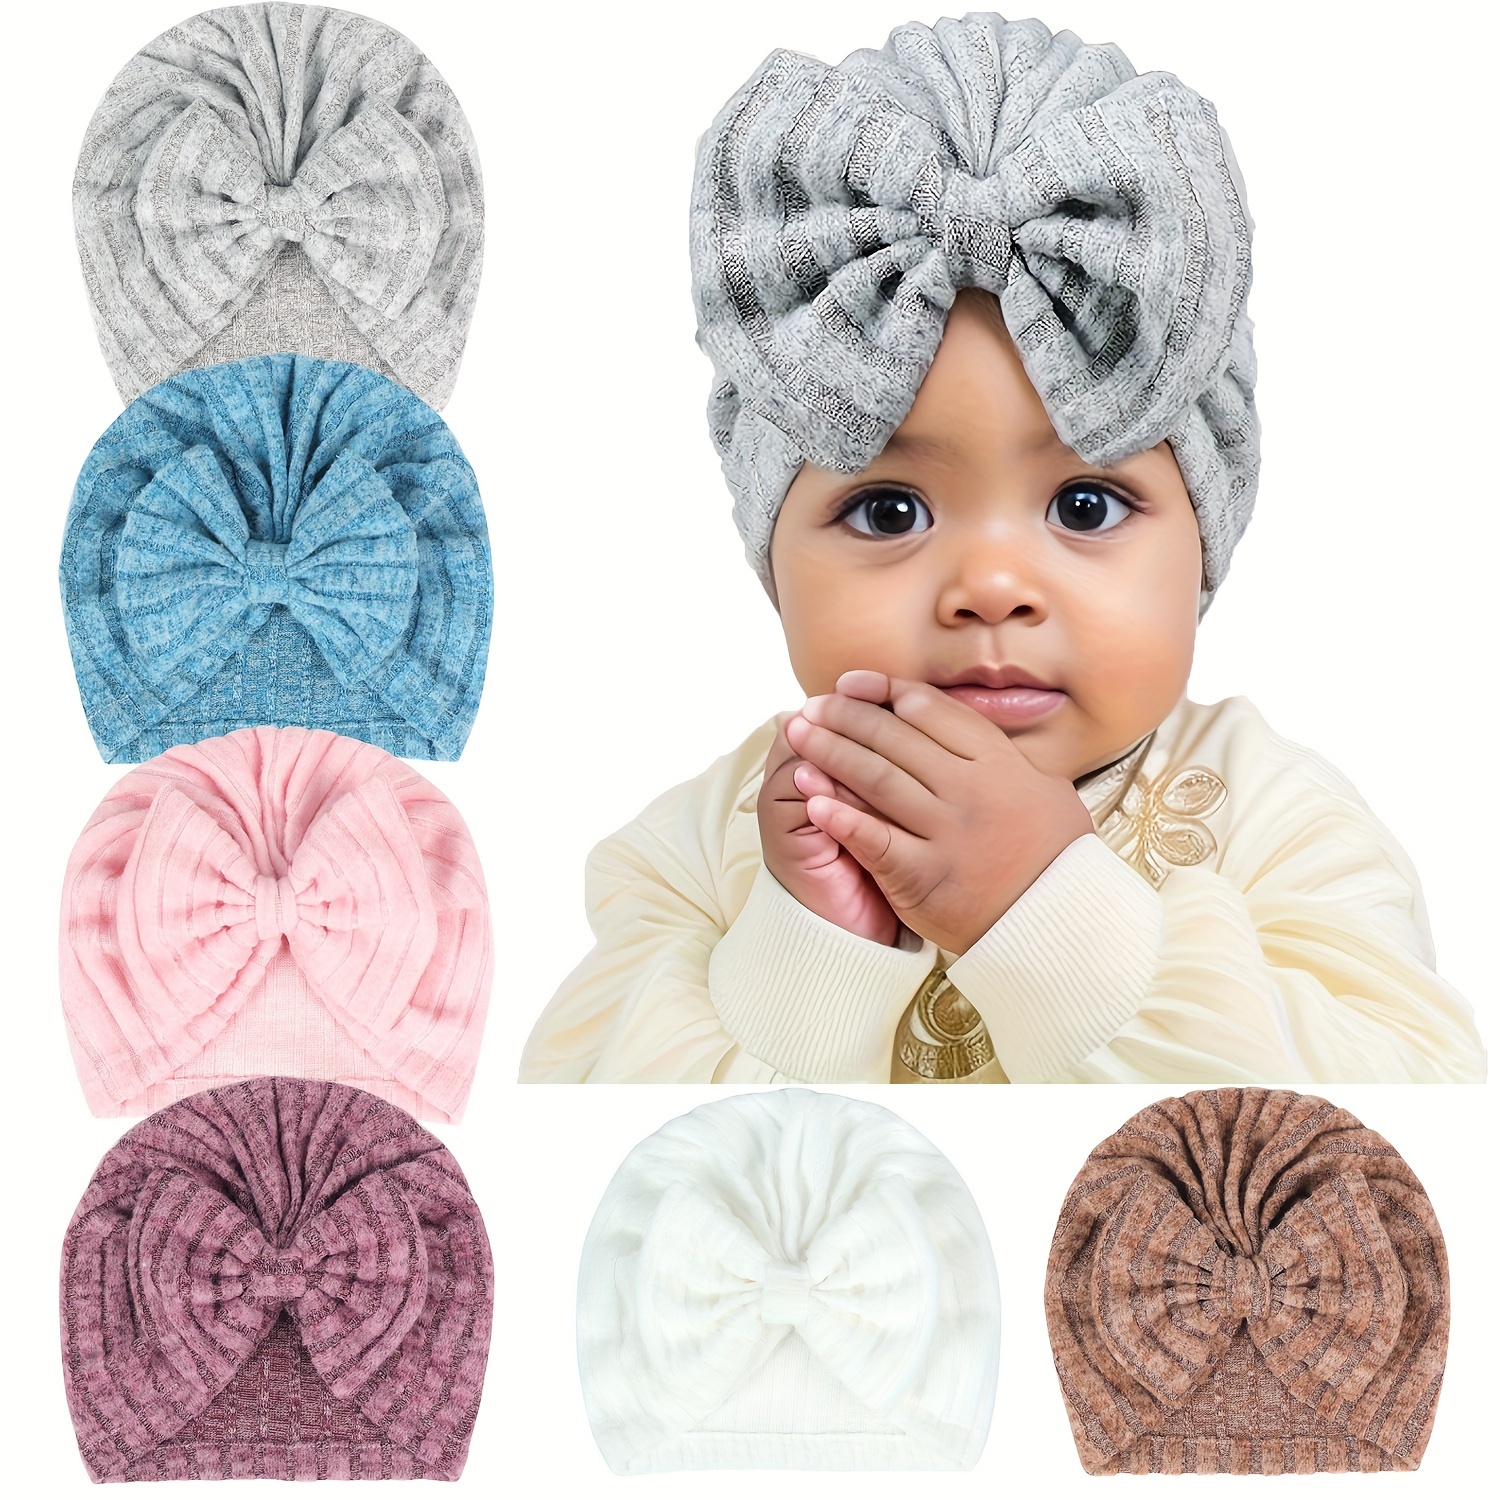 

3pcs Warm Bow Hats For Newborns And Infants - Solid Colors, Stripes, And Frayed Design - Perfect For Baby Girls And Boys